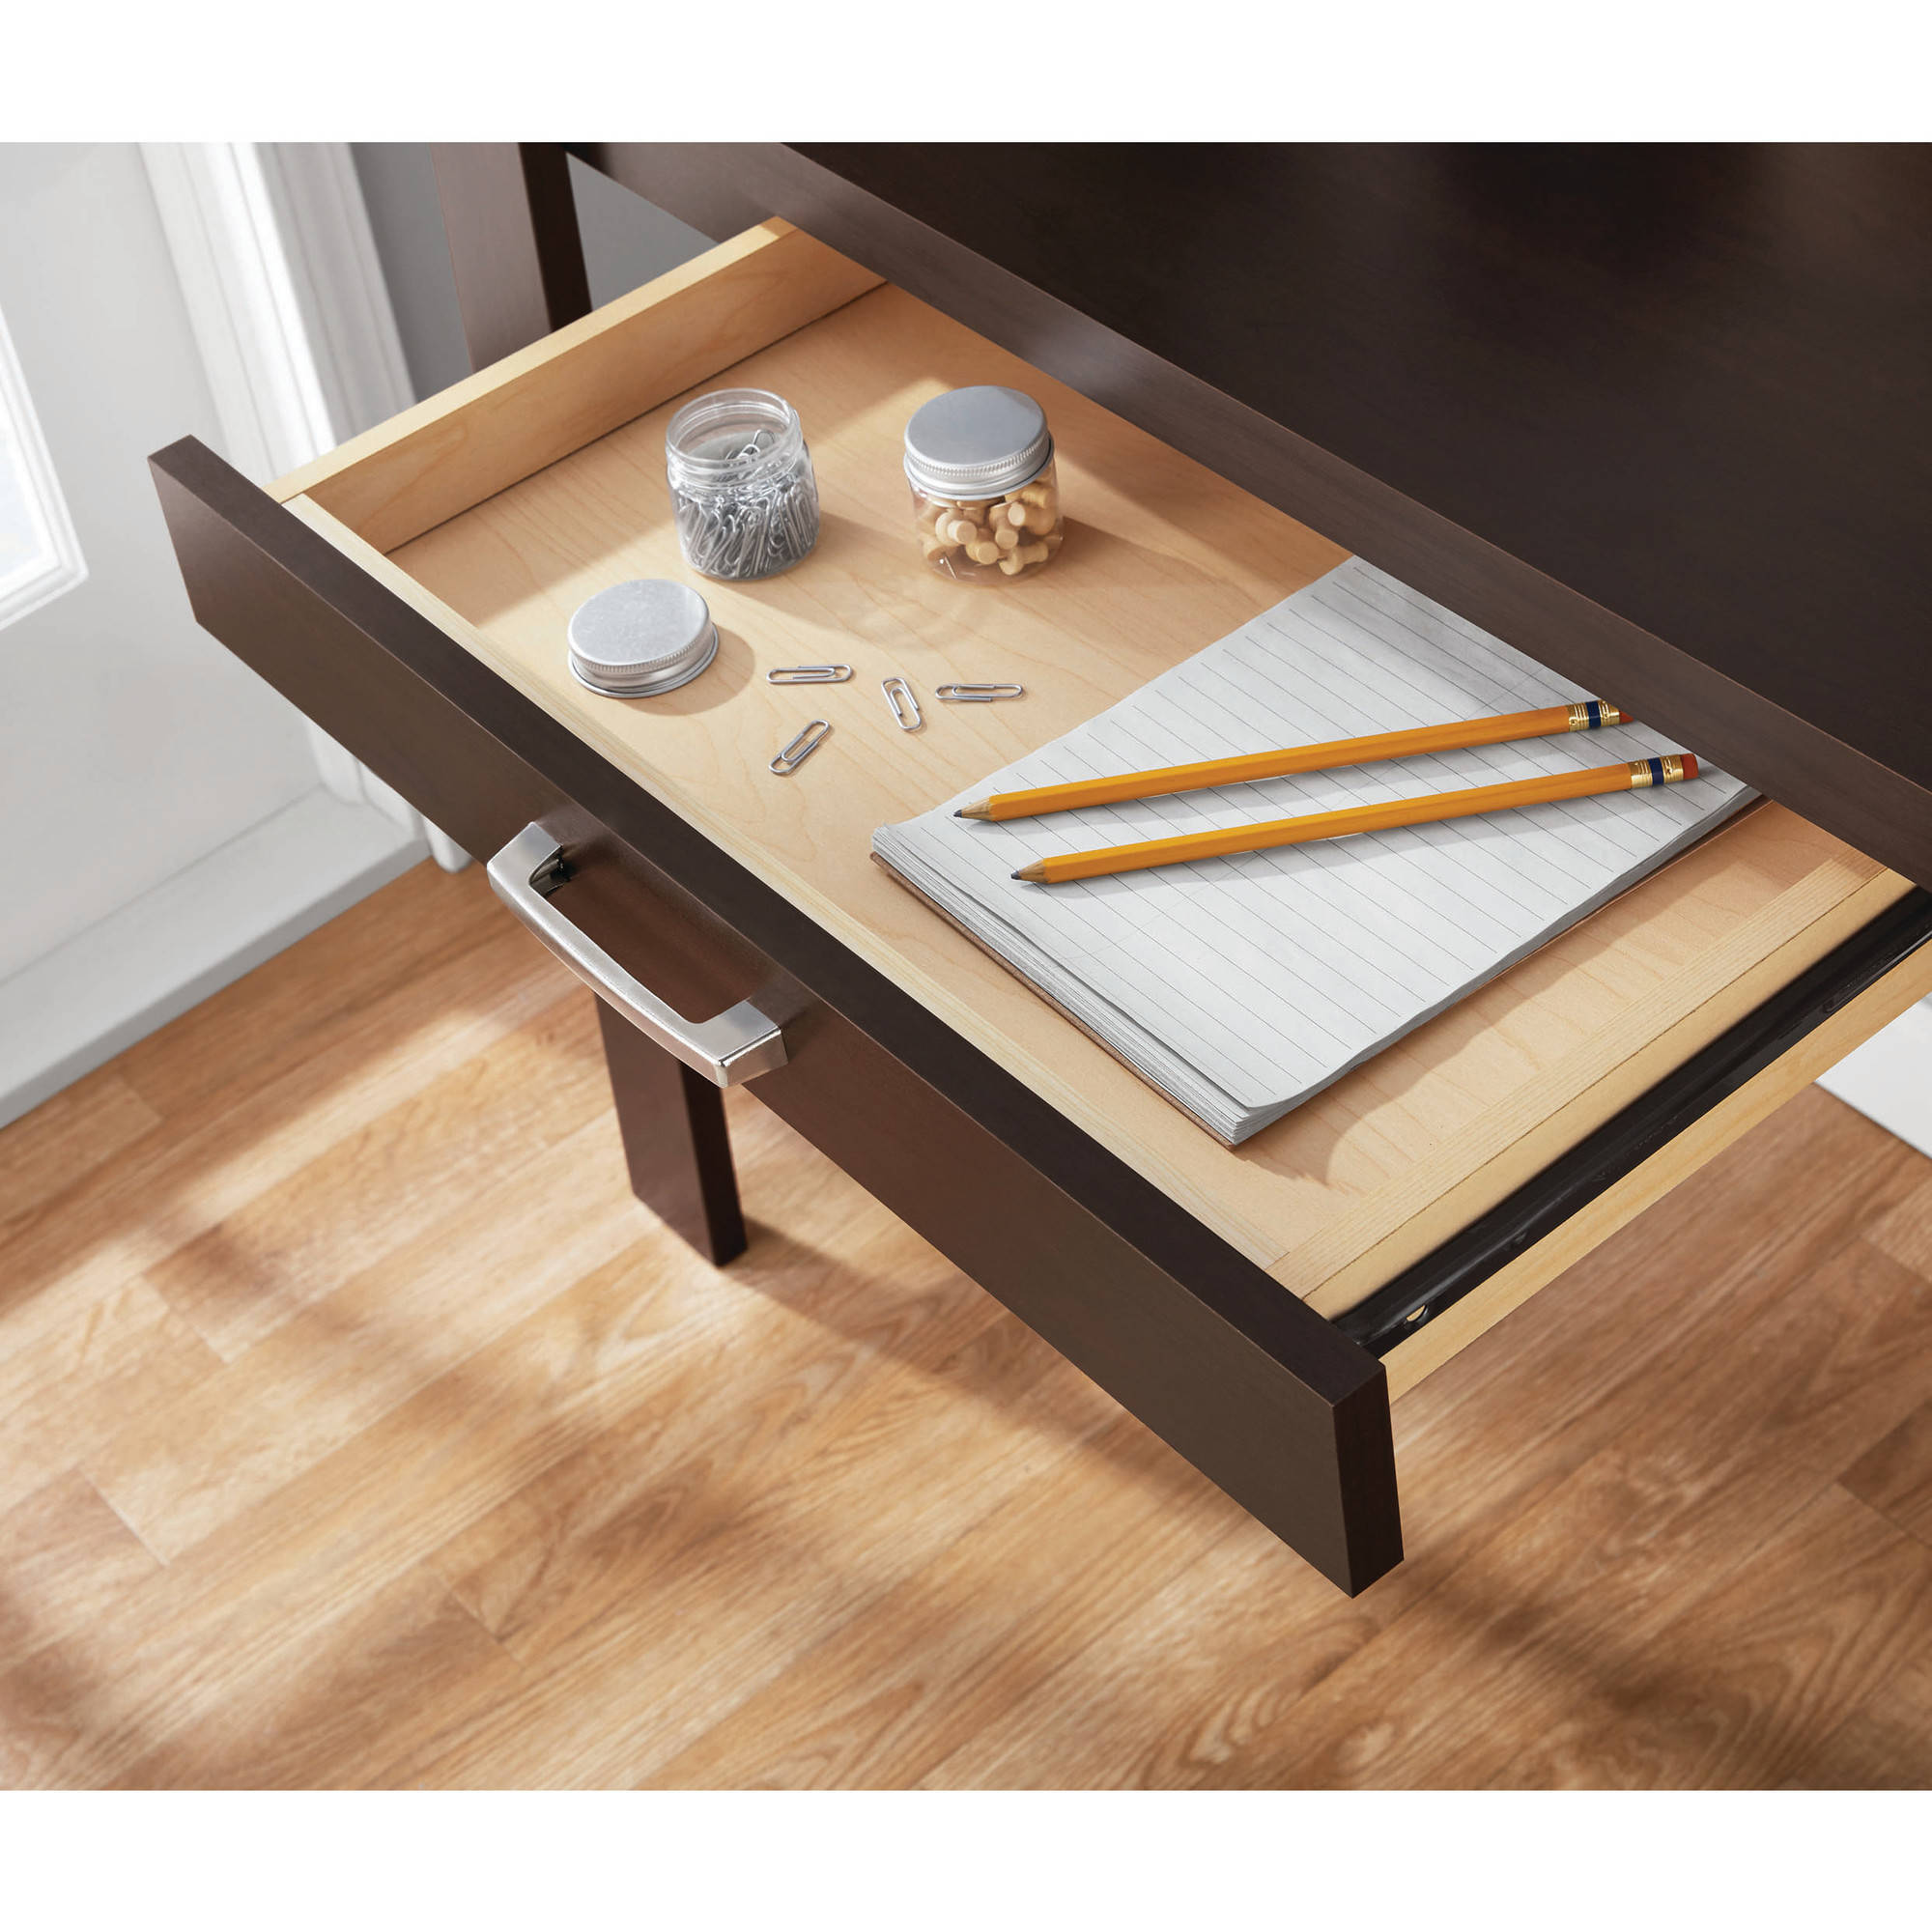 Mainstays Logan Writing Desk with Pullout Drawer - image 3 of 4